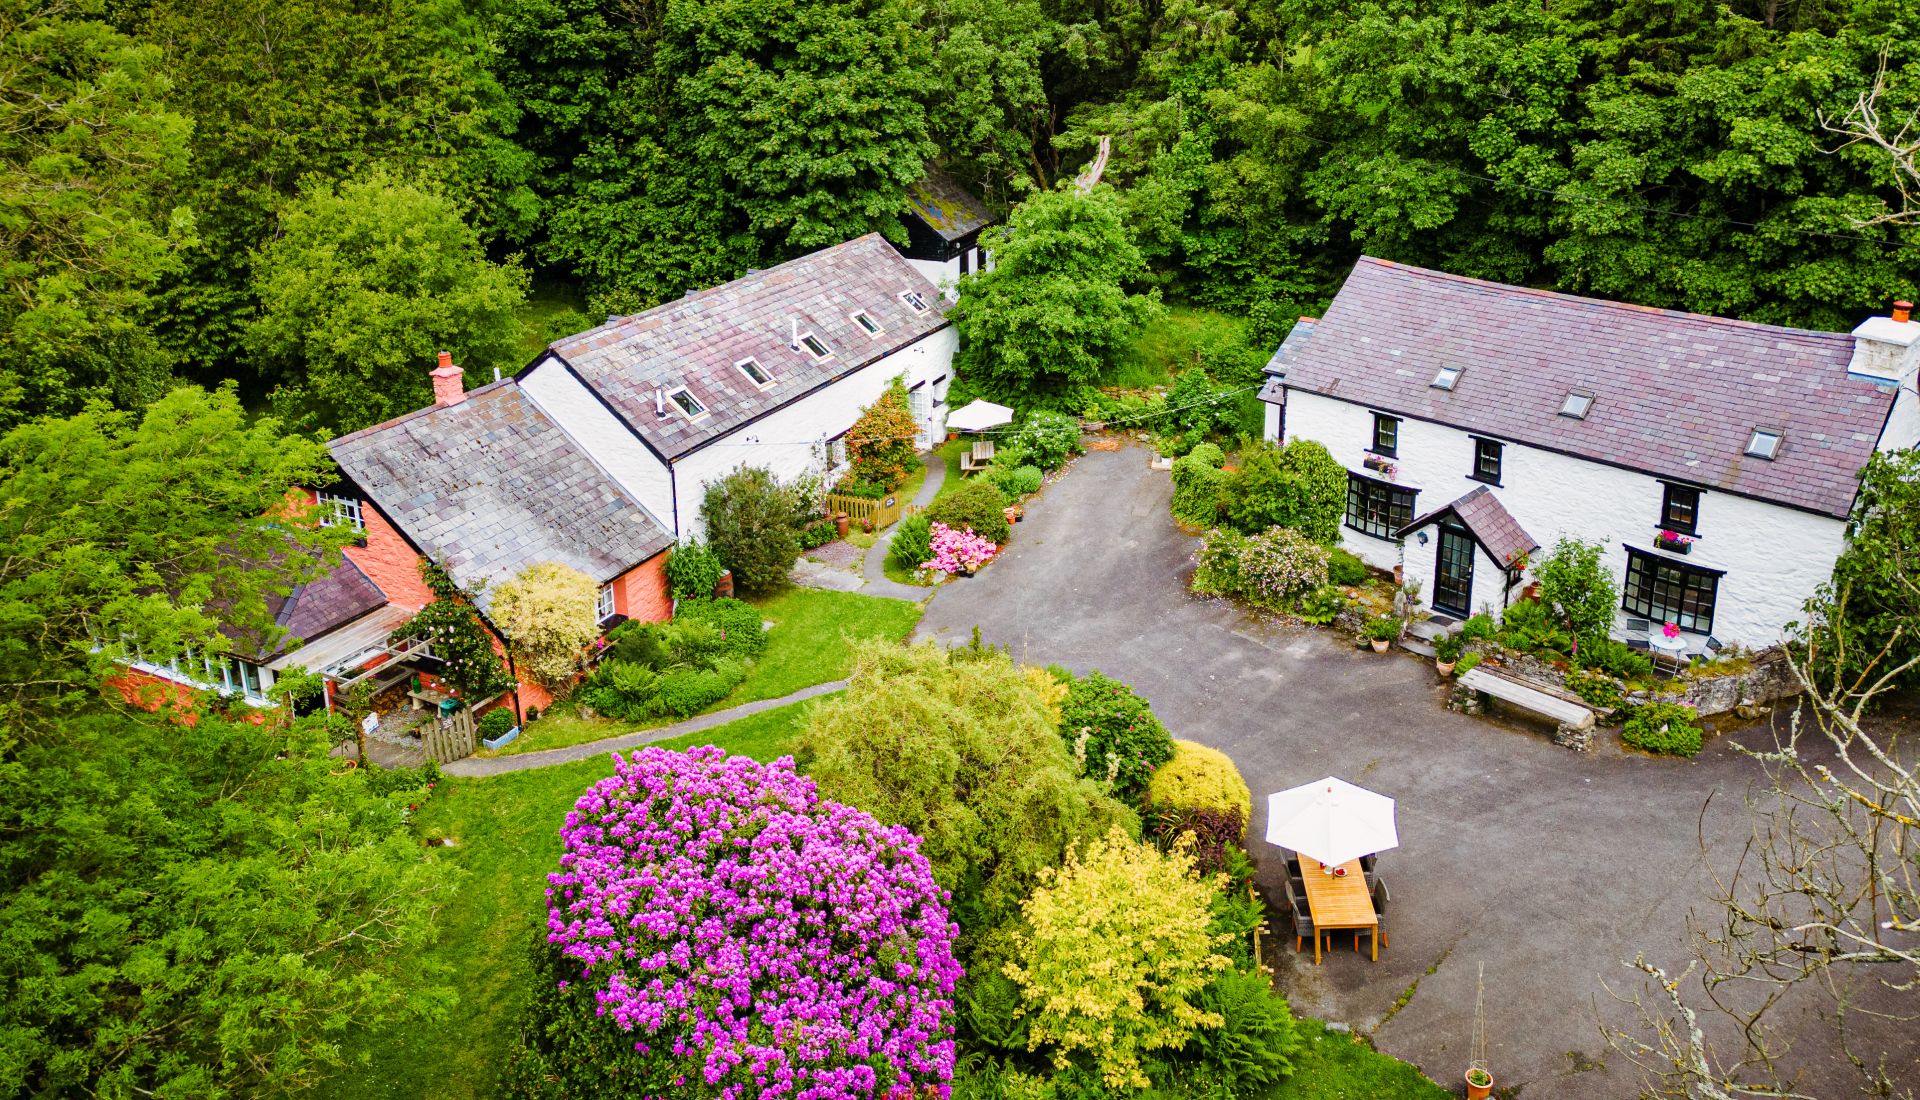 Self-Catering Cottages near Aberystywth